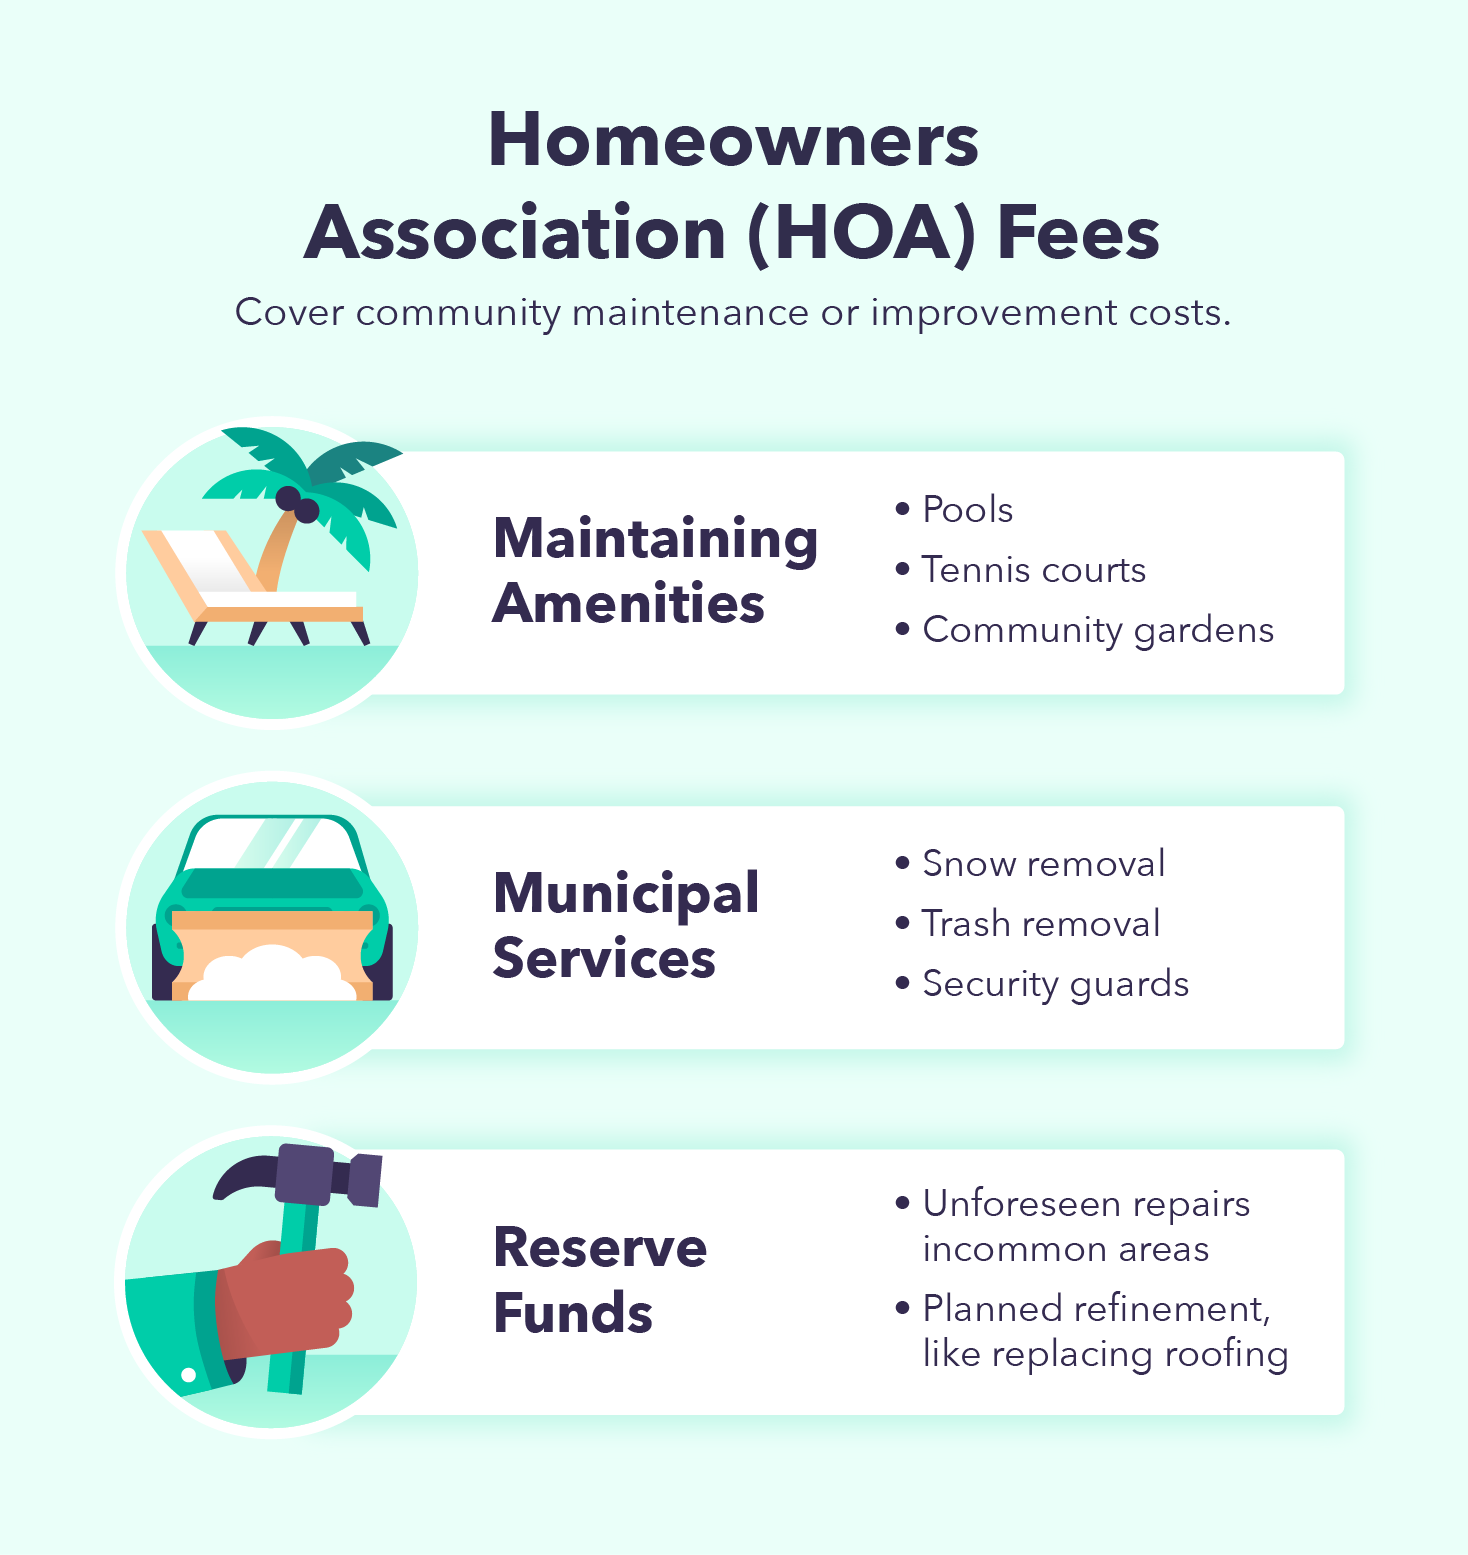 HOA fees cover community maintenance or improvement costs. 